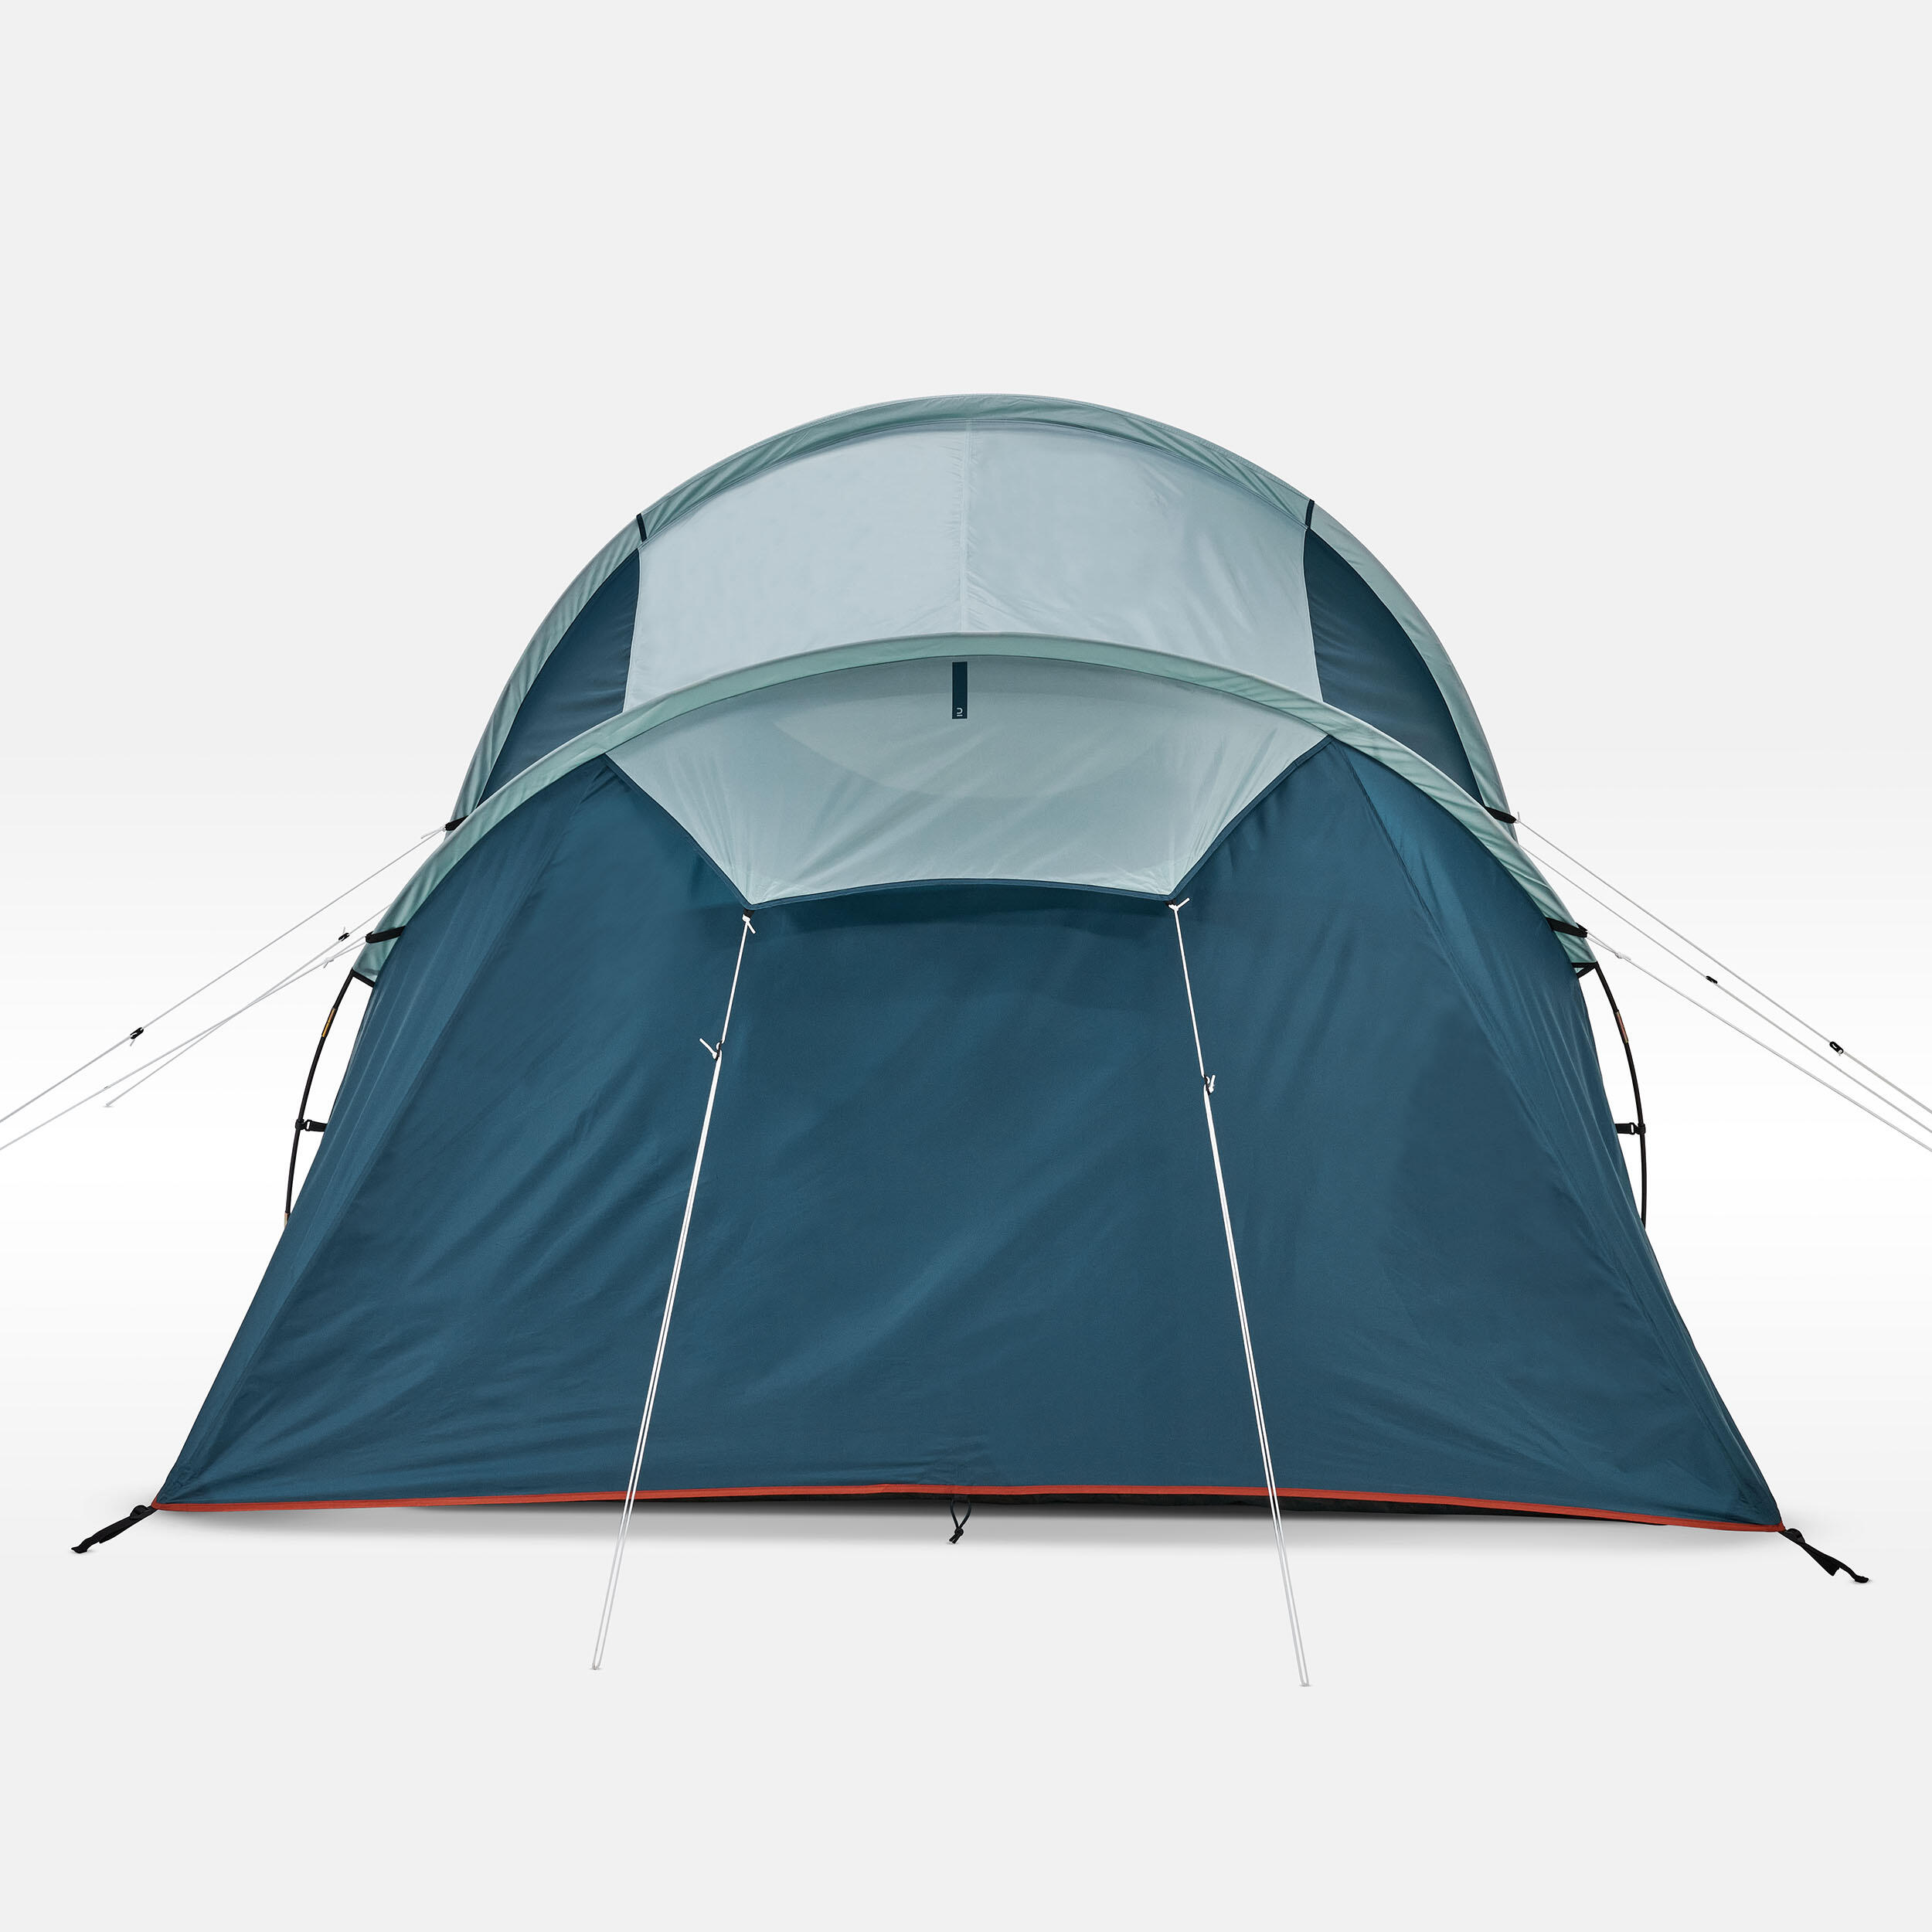 Camping tent with poles - Arpenaz 4.1 - 4 Person - 1 Bedroom 6/17